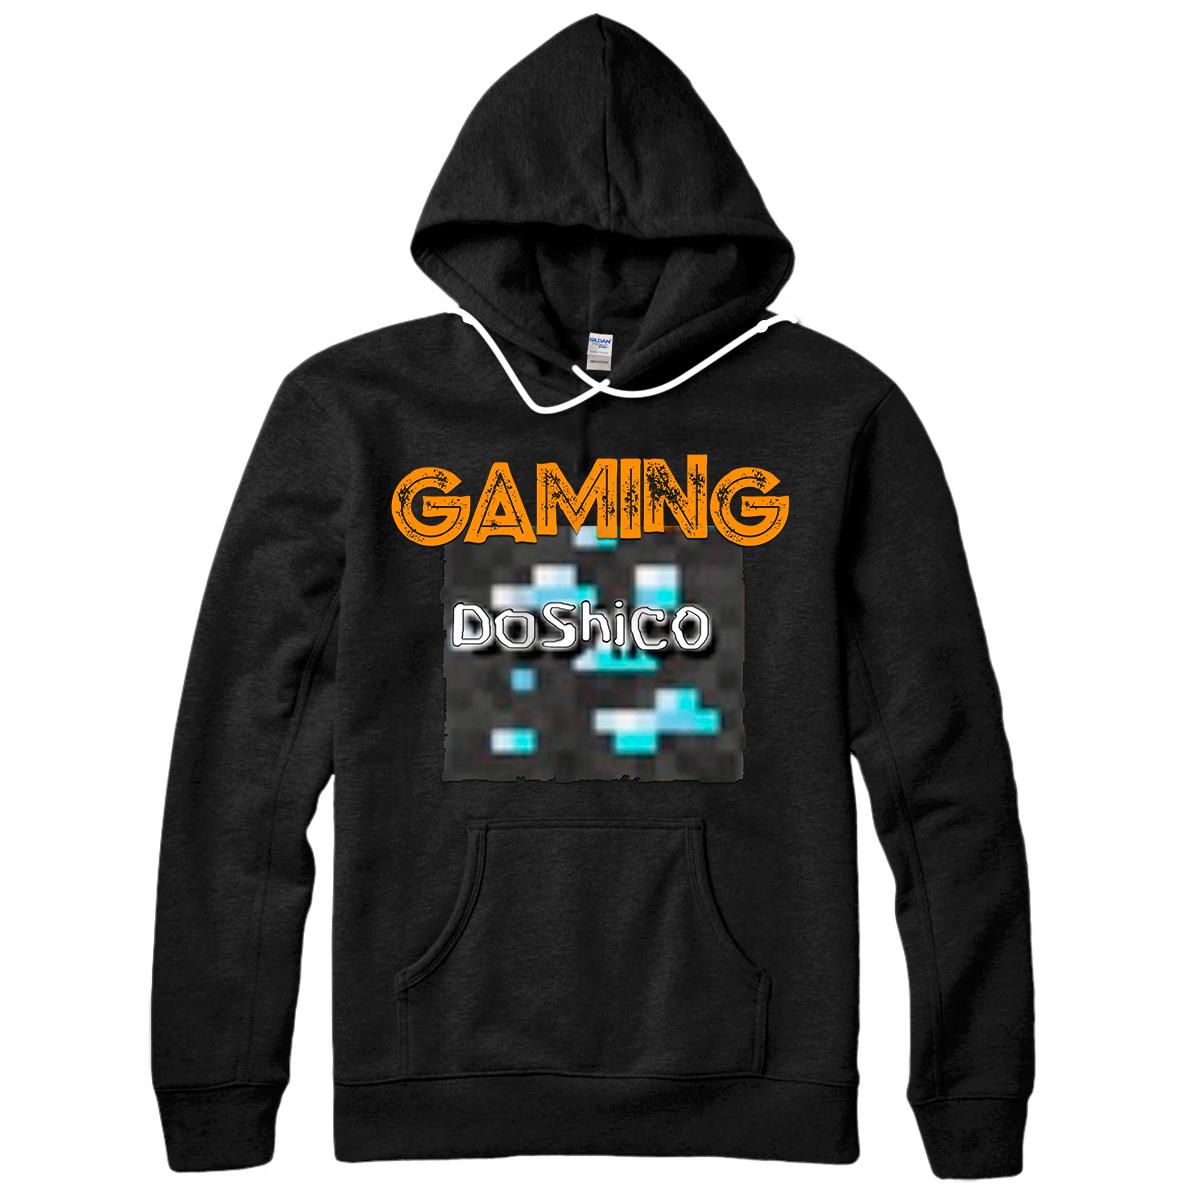 Personalized Doshico Gaming Apparel Pullover Hoodie